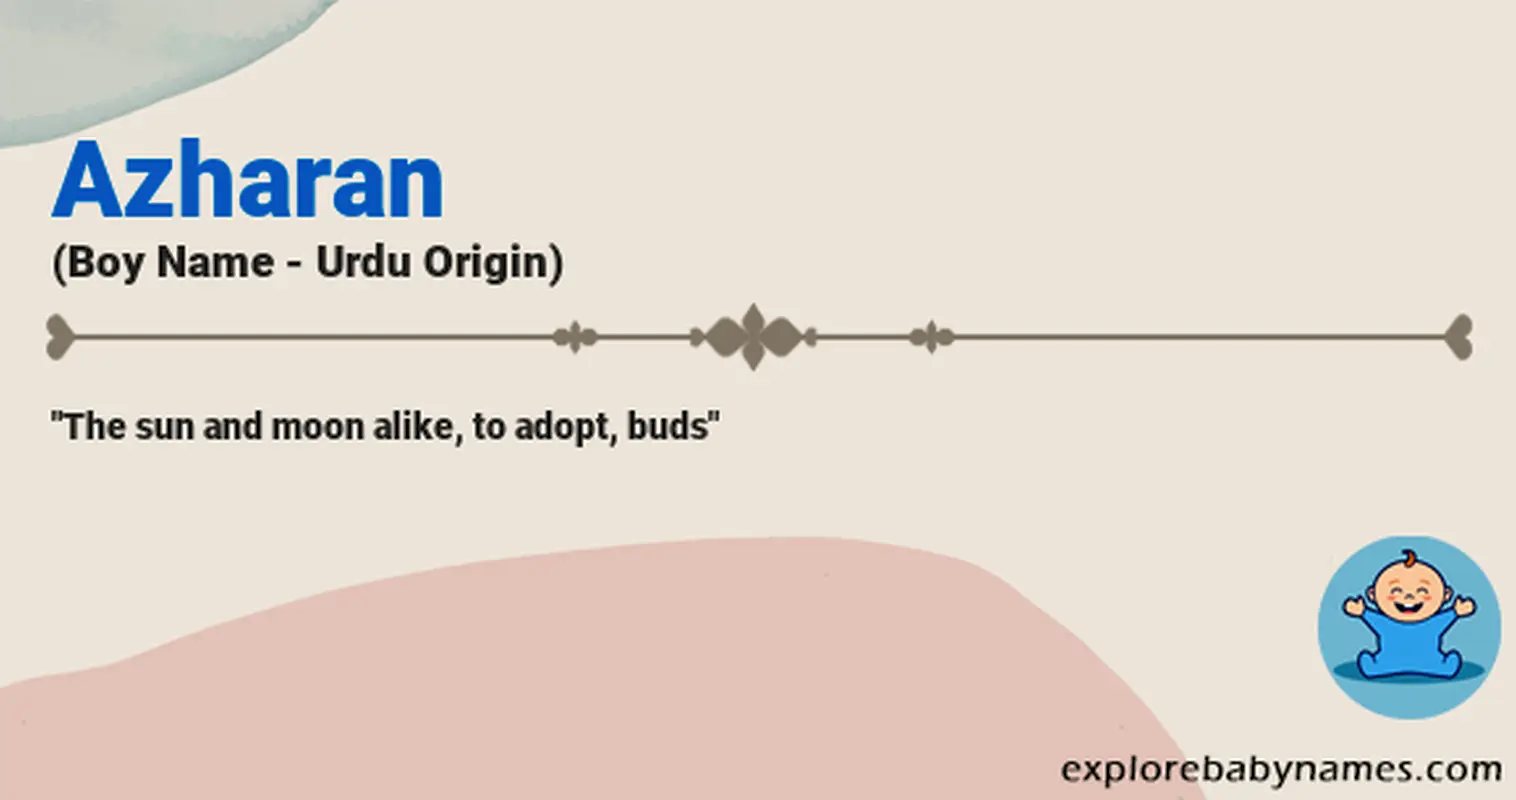 Meaning of Azharan